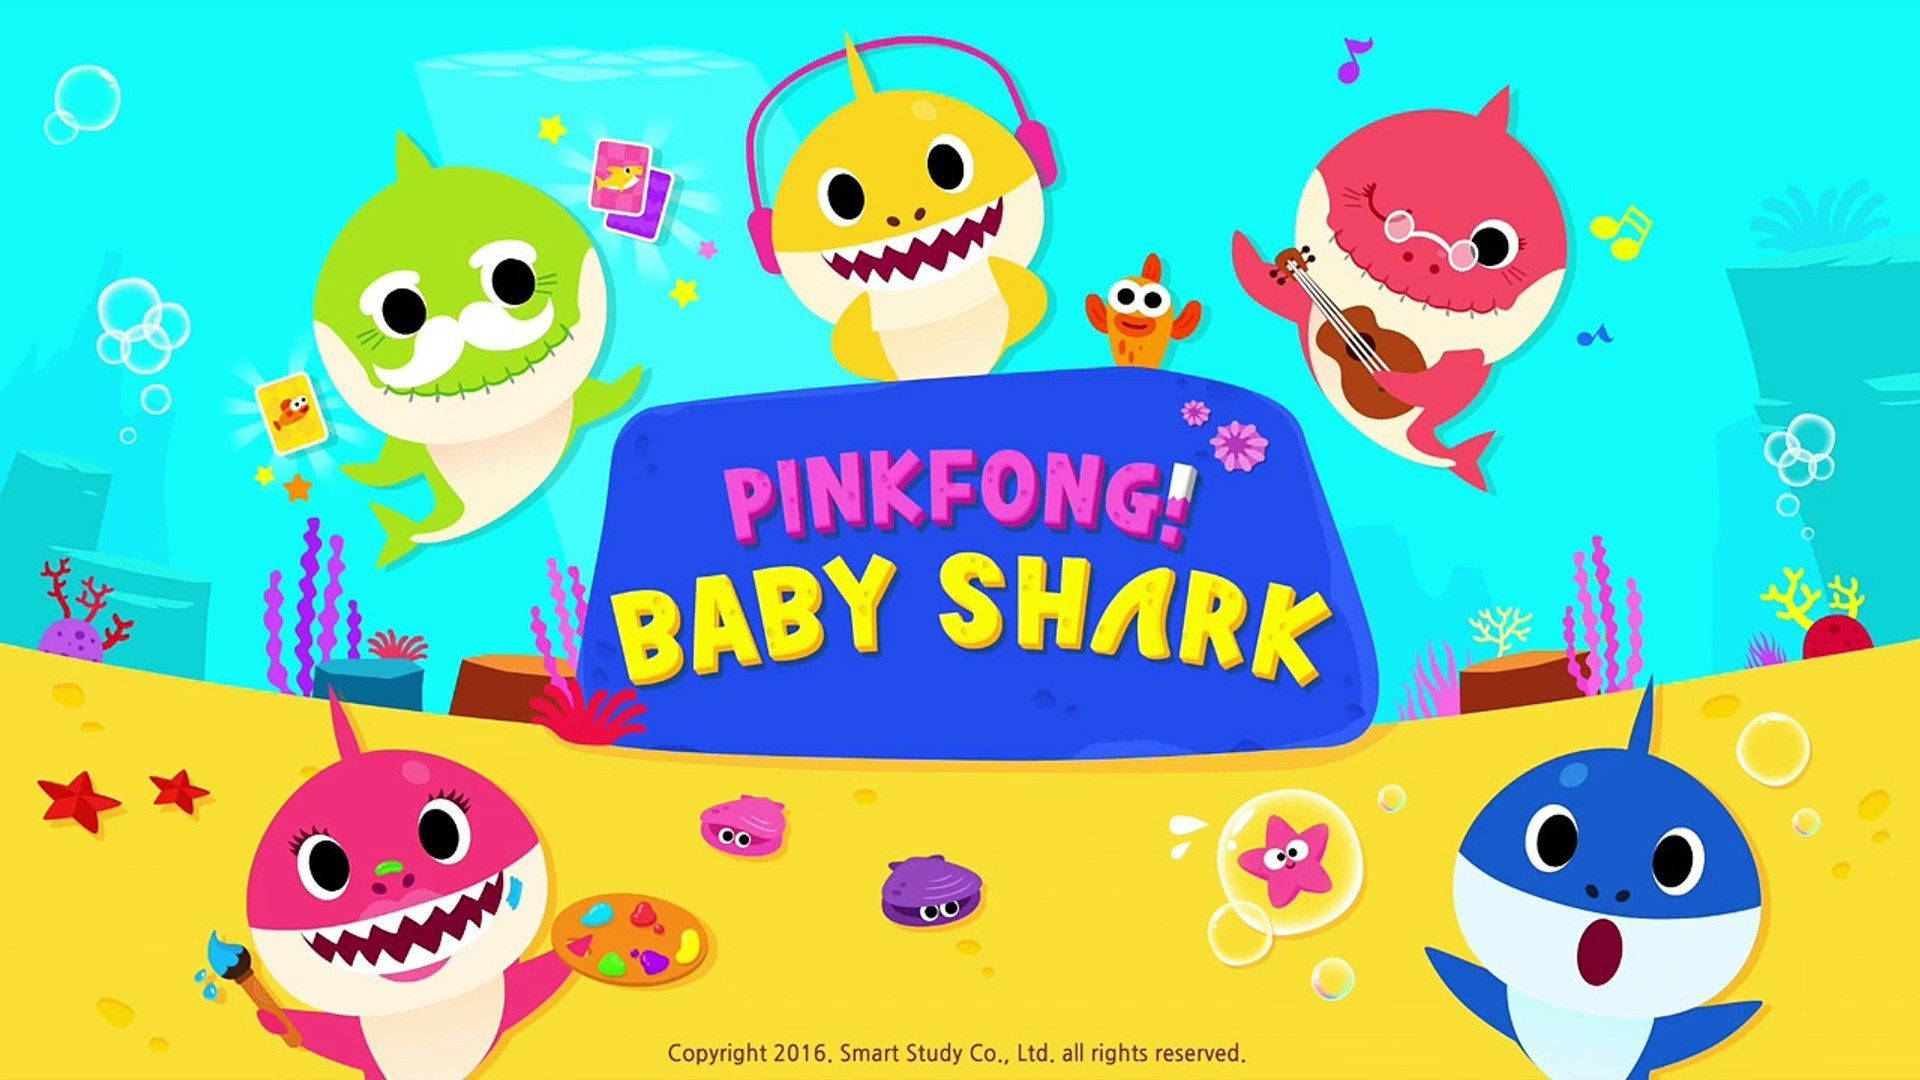 Pinkfong Wallpaper Images